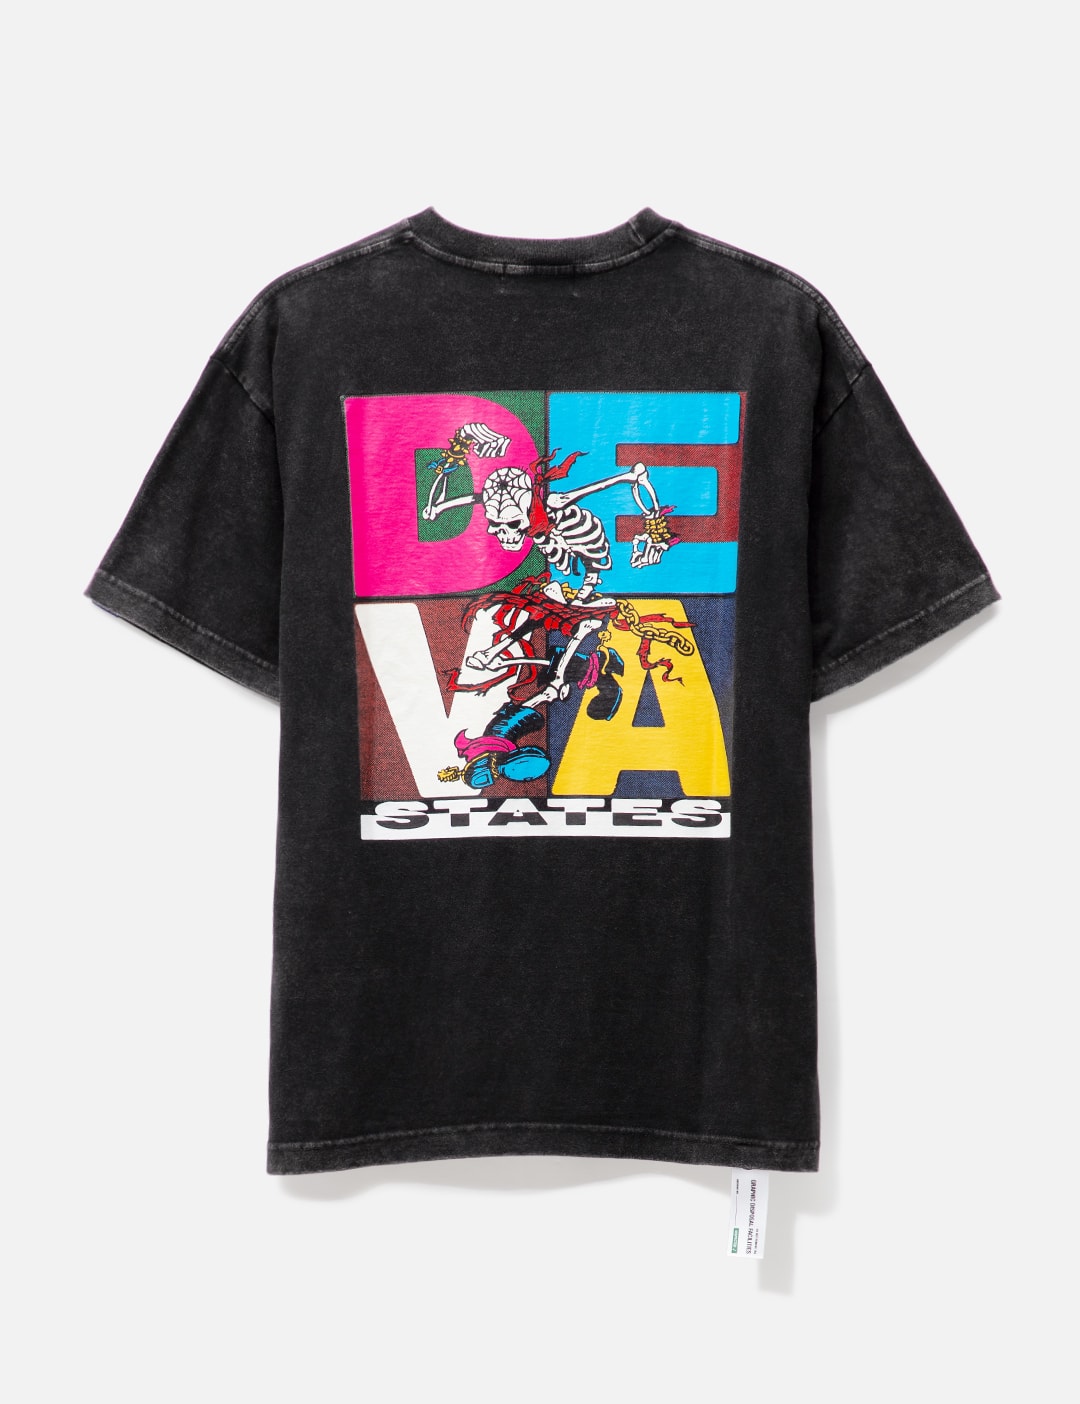 DEVÁ STATES - Stomper T-shirt | HBX - Globally Curated Fashion and ...